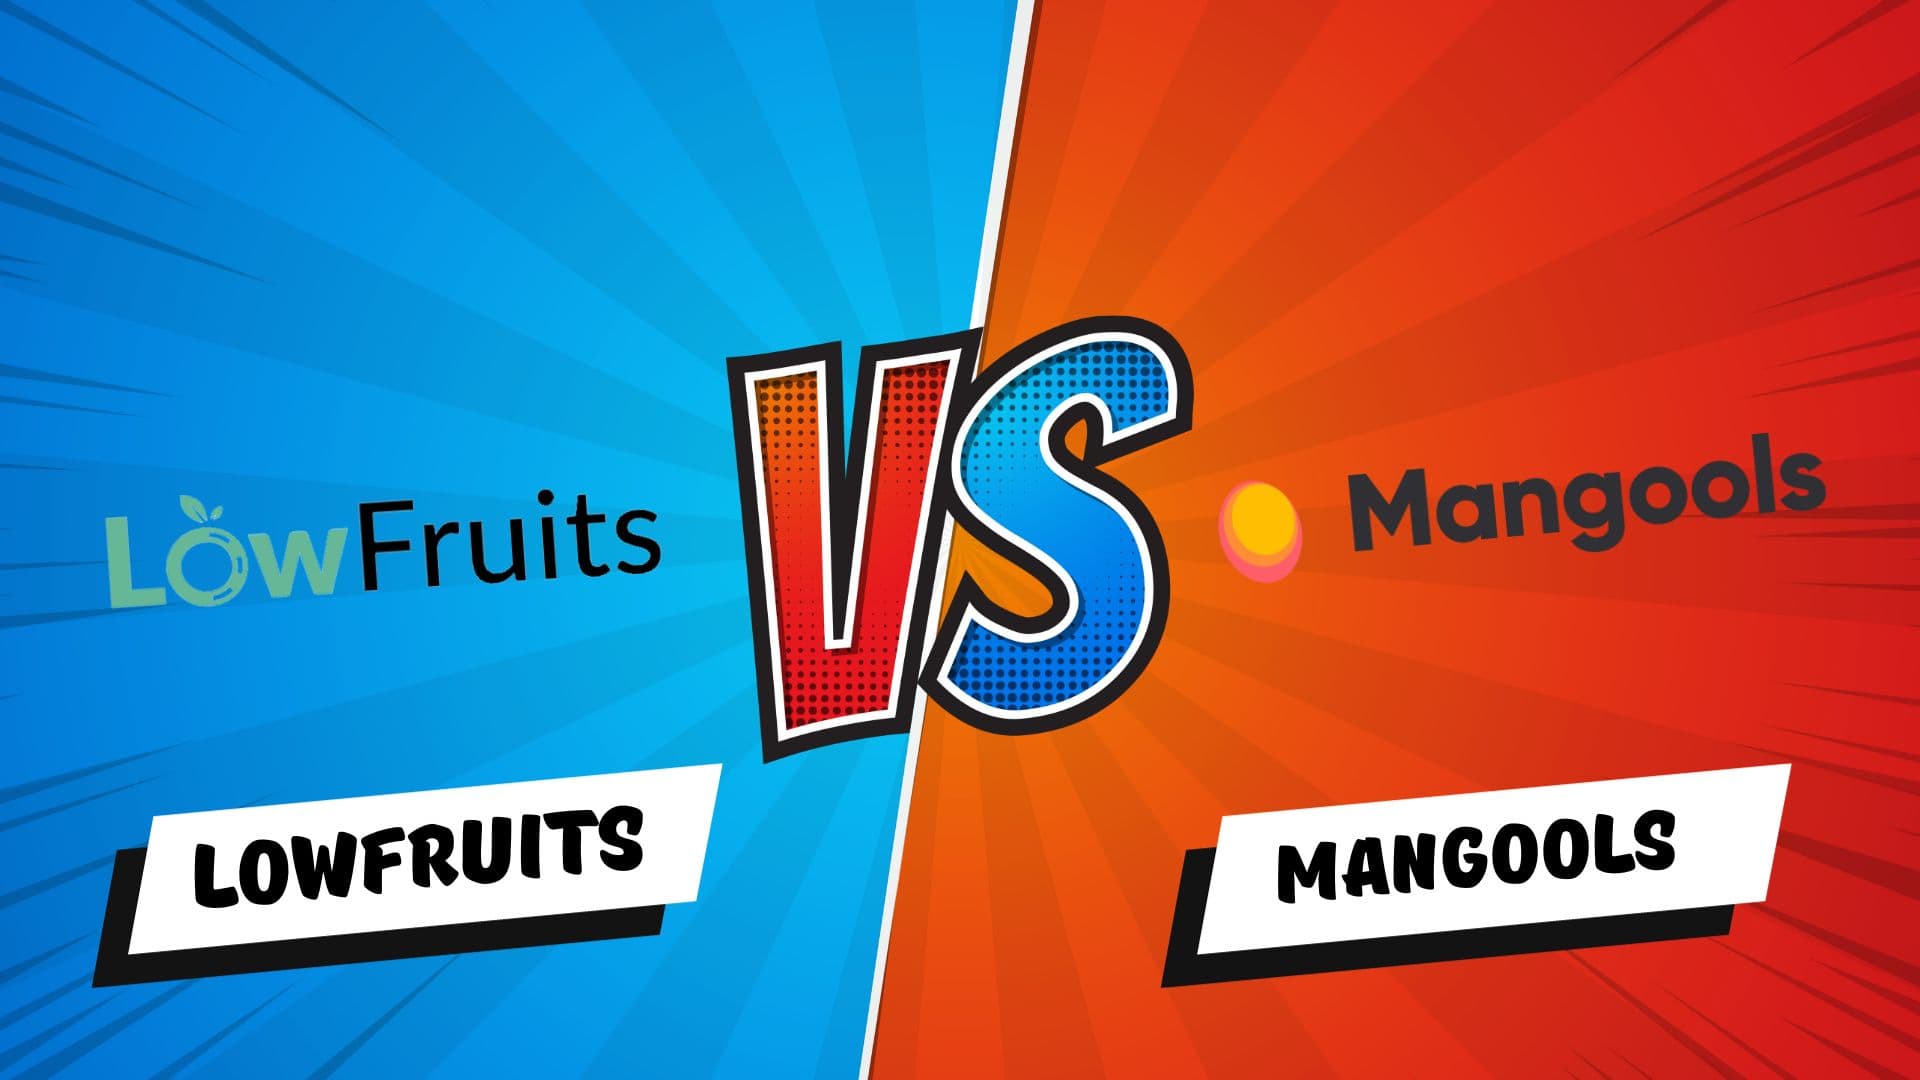 Conducting keyword research to compare the search volume and competition levels between low fruits and mangogos using Mangools.